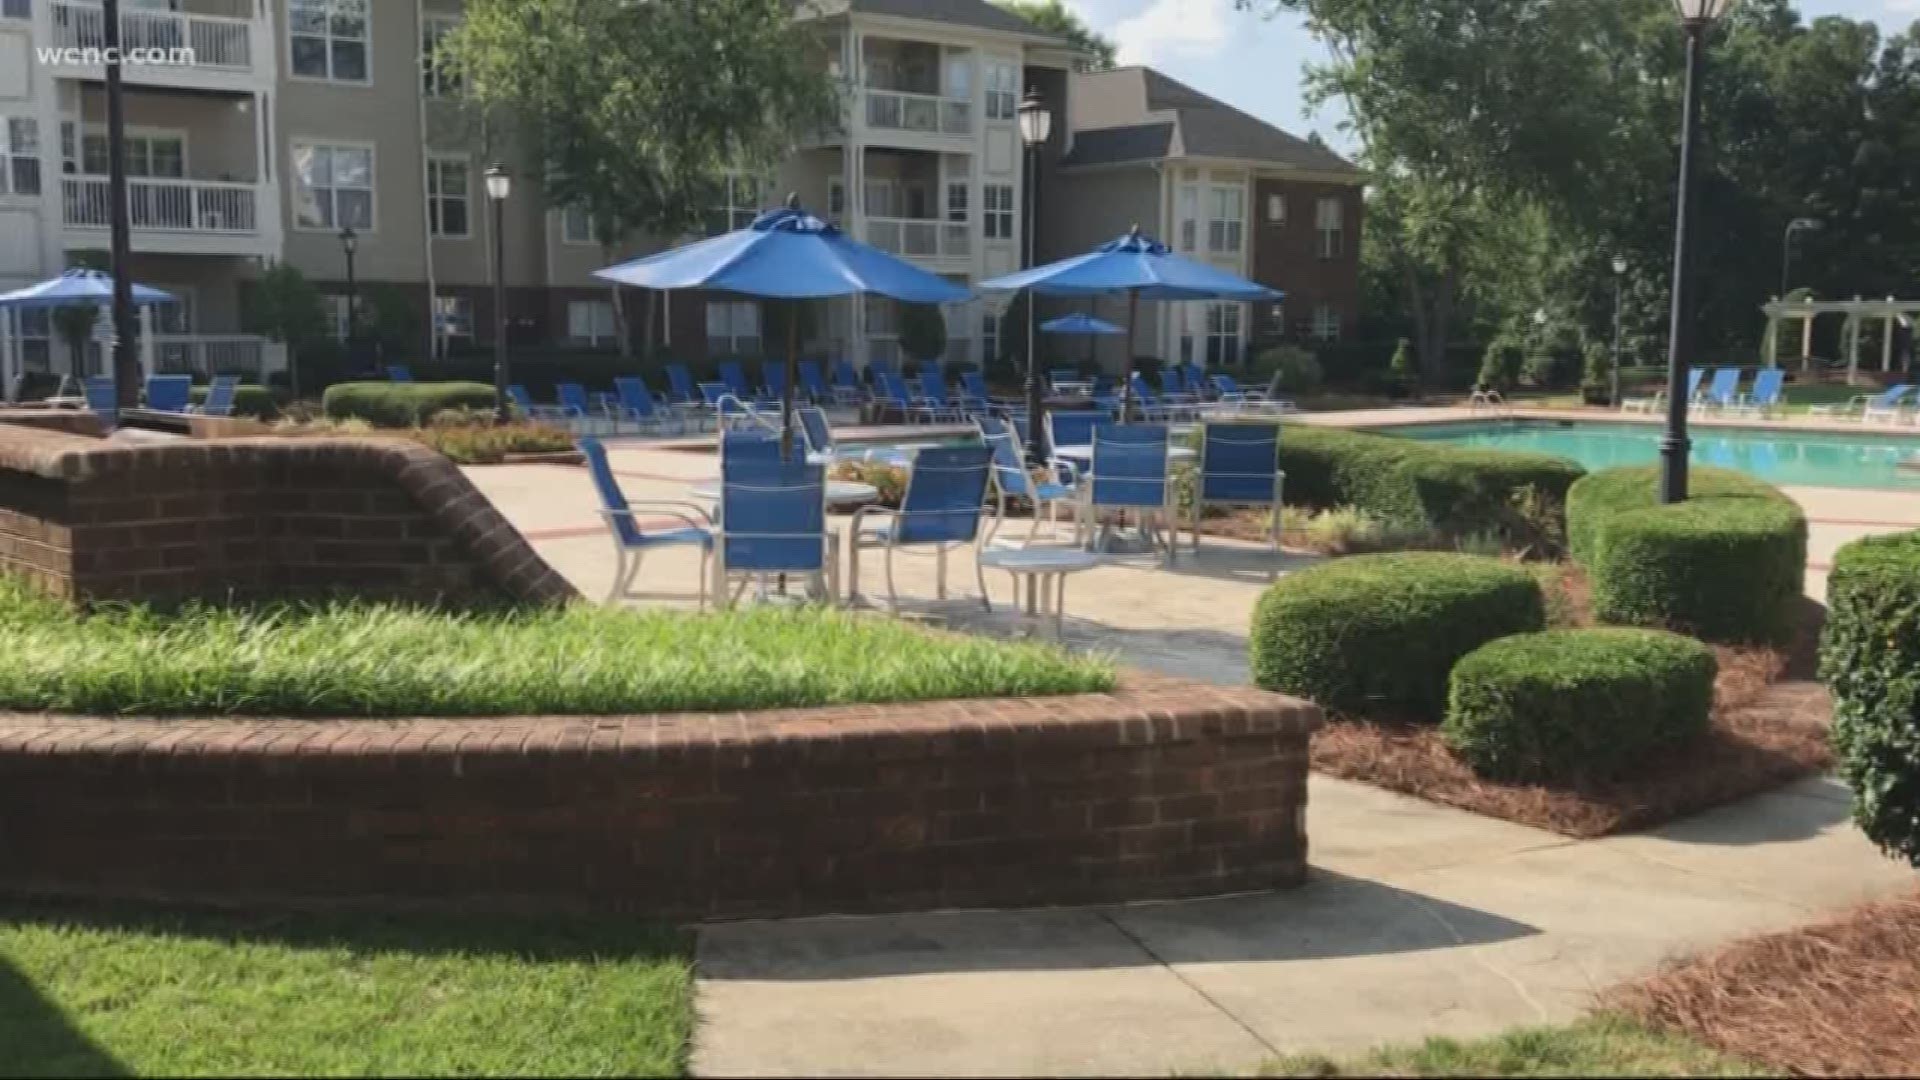 Mecklenburg EMS said one person is seriously hurt after they responded to a drowning call on Saturday afternoon. It happened at an apartment complex in Ballantyne.